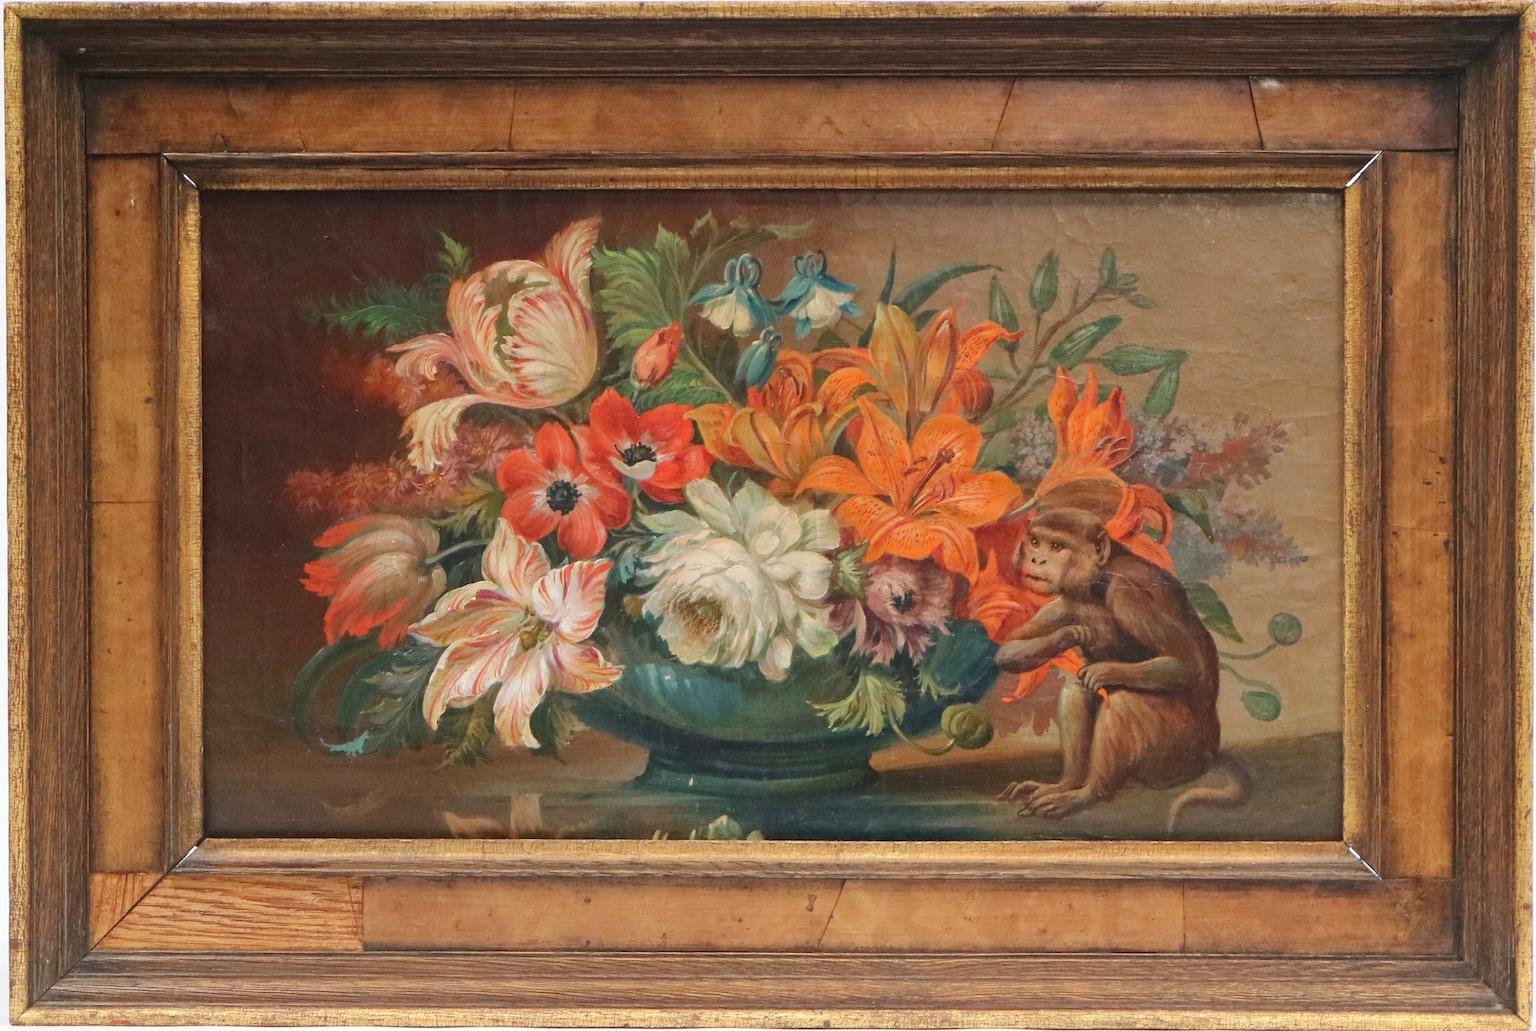 Flemish school still life painting rendered in oil paint on board. The painting features a grand floral arrangement against a muted background with a monkey sitting to the side. Wear appropriate to age and use. The painting remains in excellent